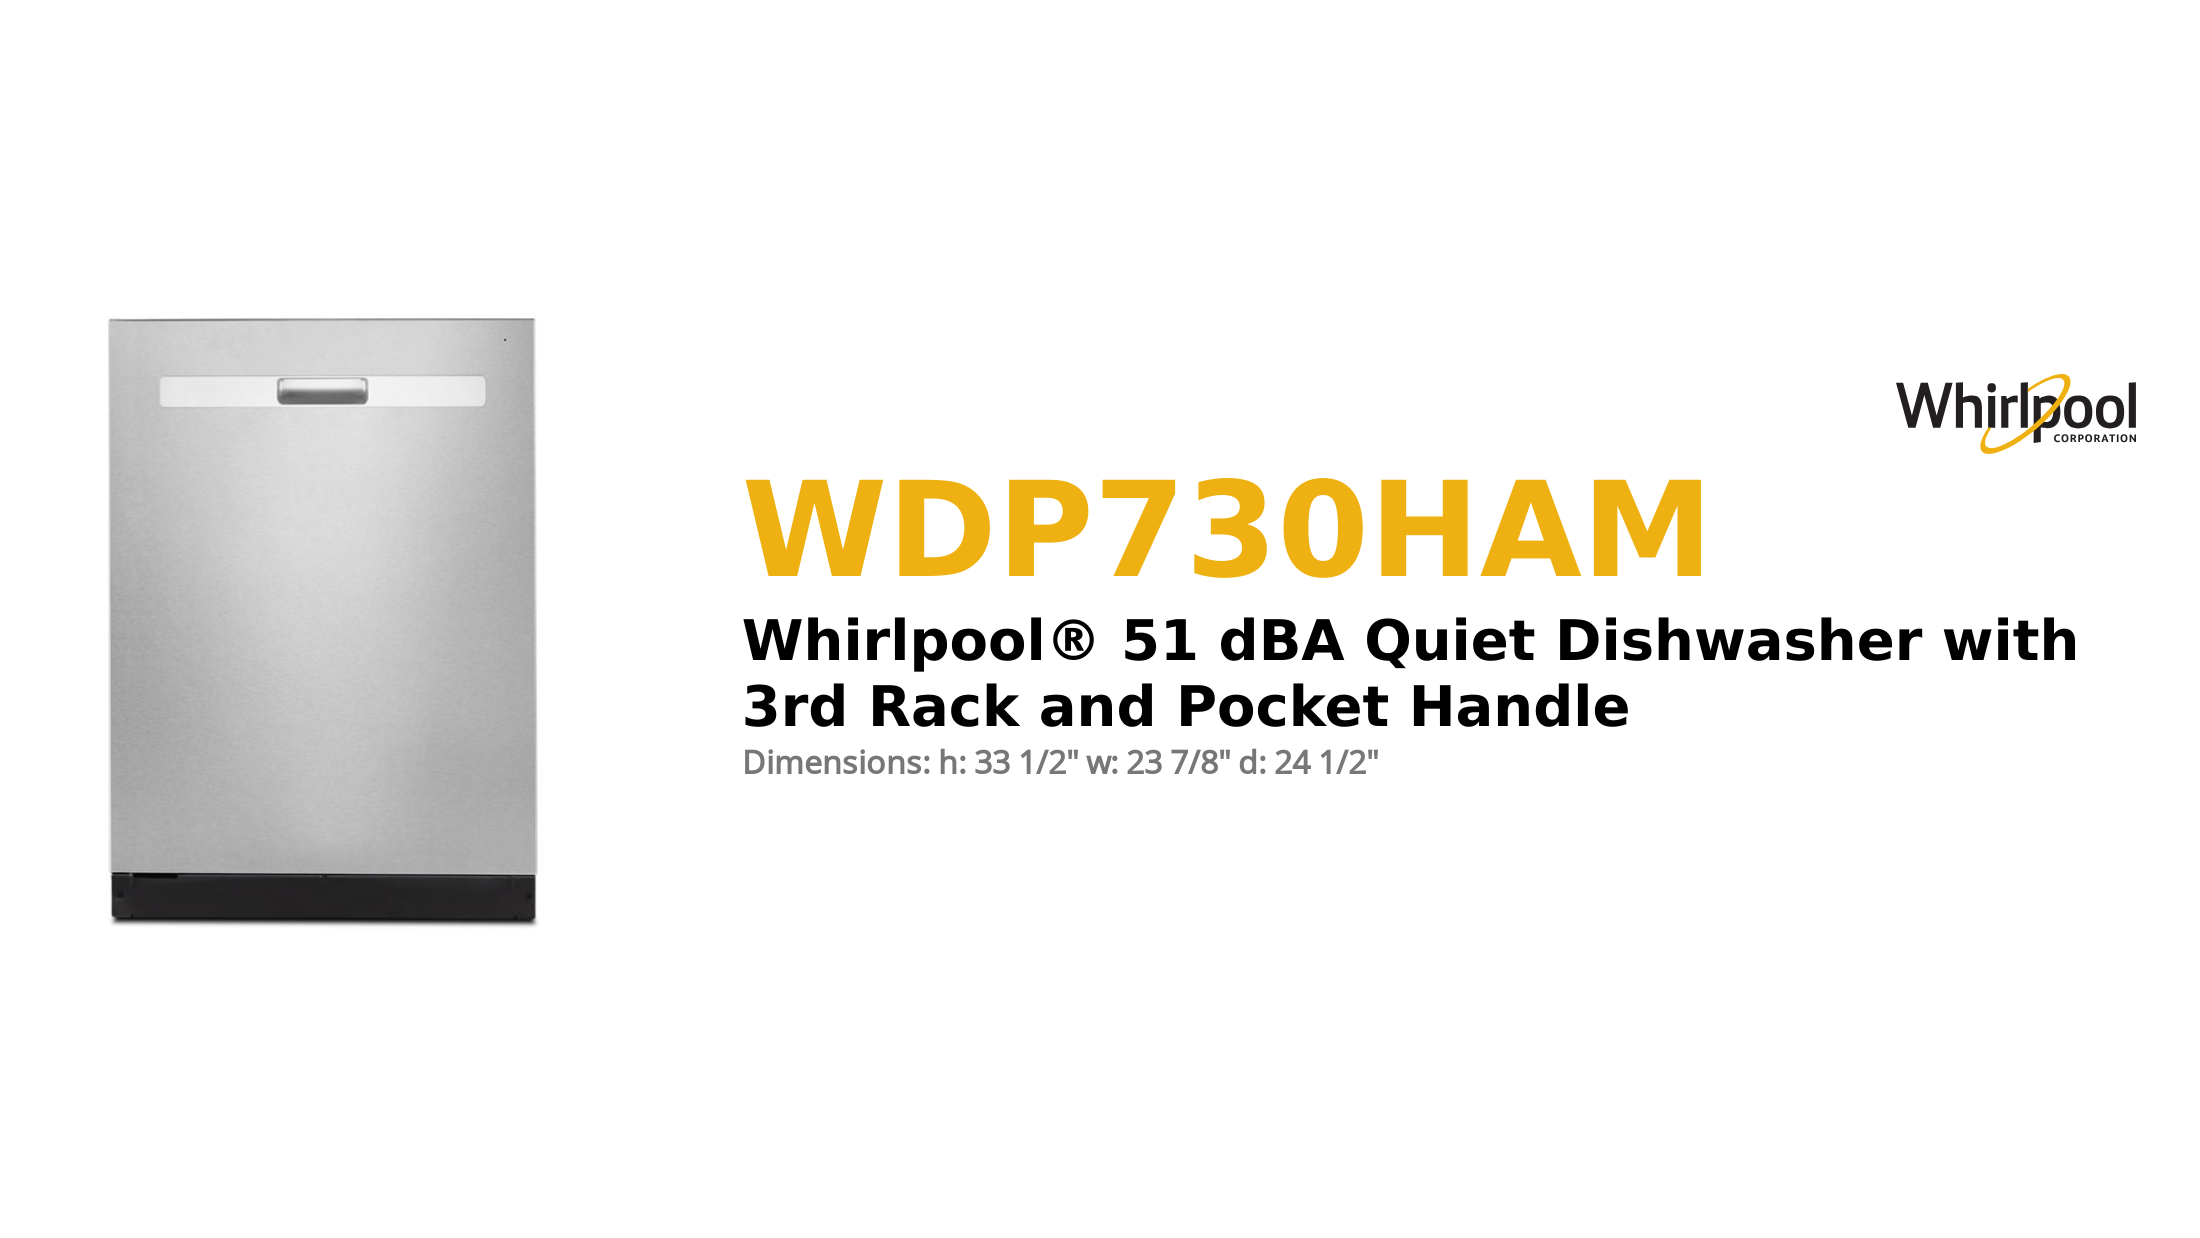 Whirlpool® 51 dBA Quiet Dishwasher with 3rd Rack and Pocket Handle